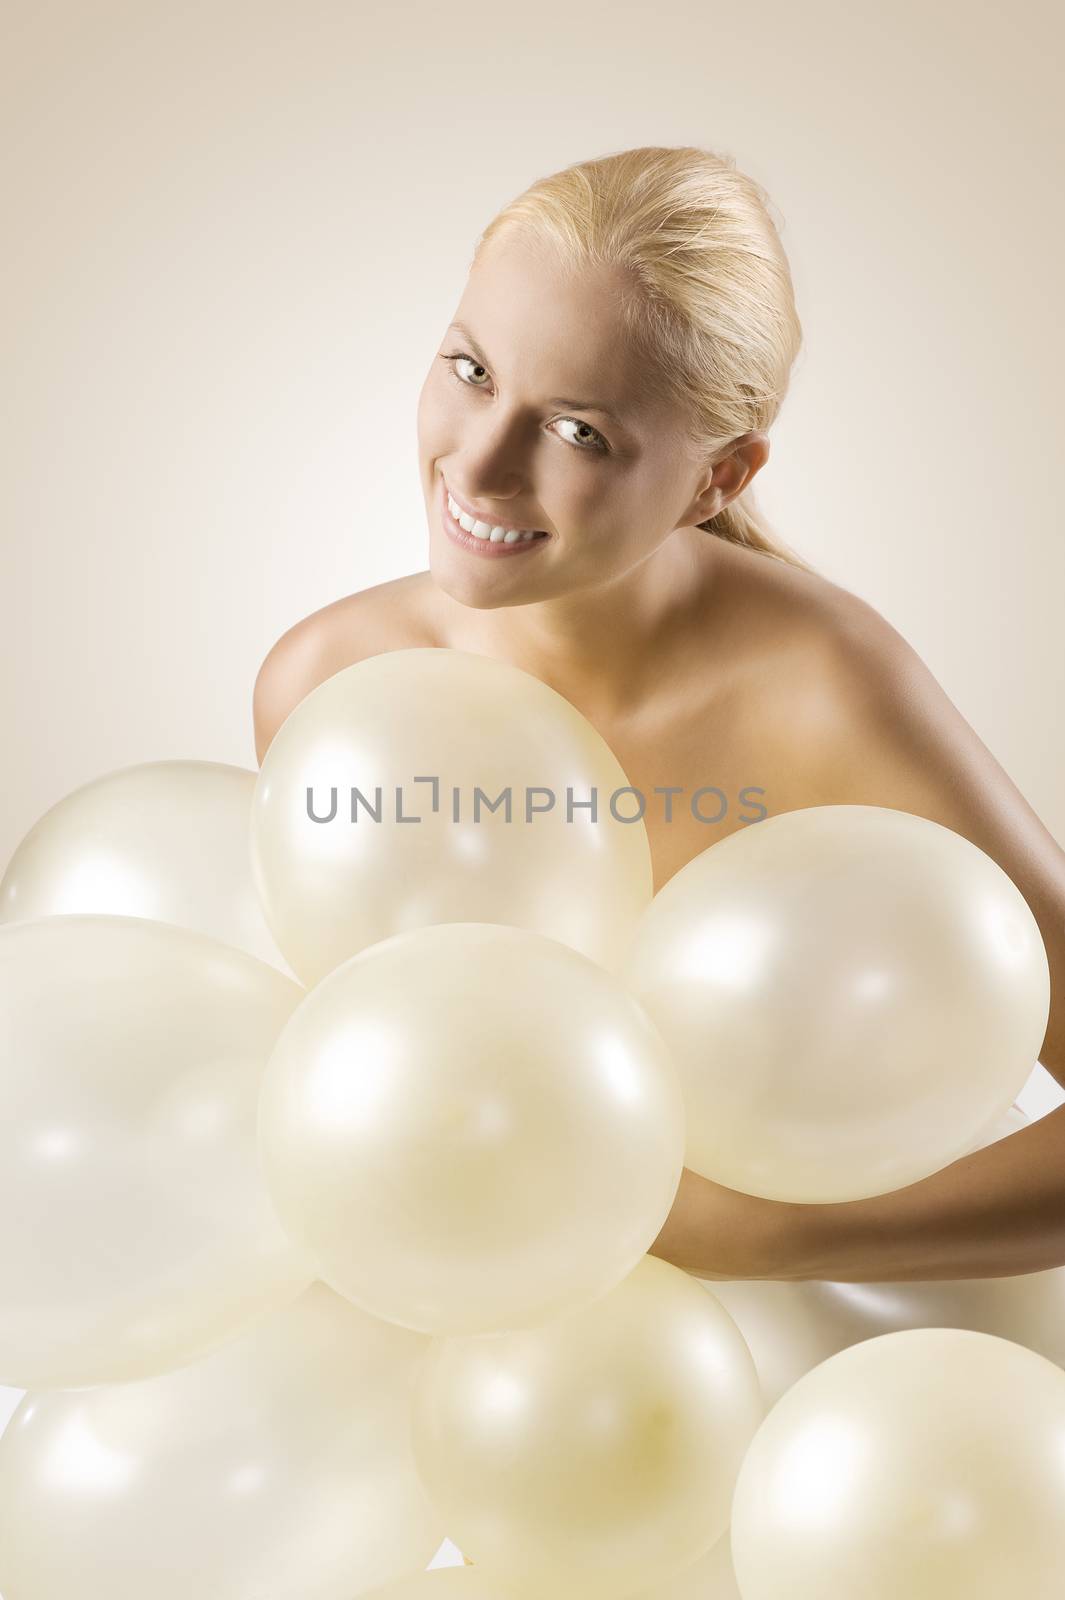 arming ballons and smiling by fotoCD